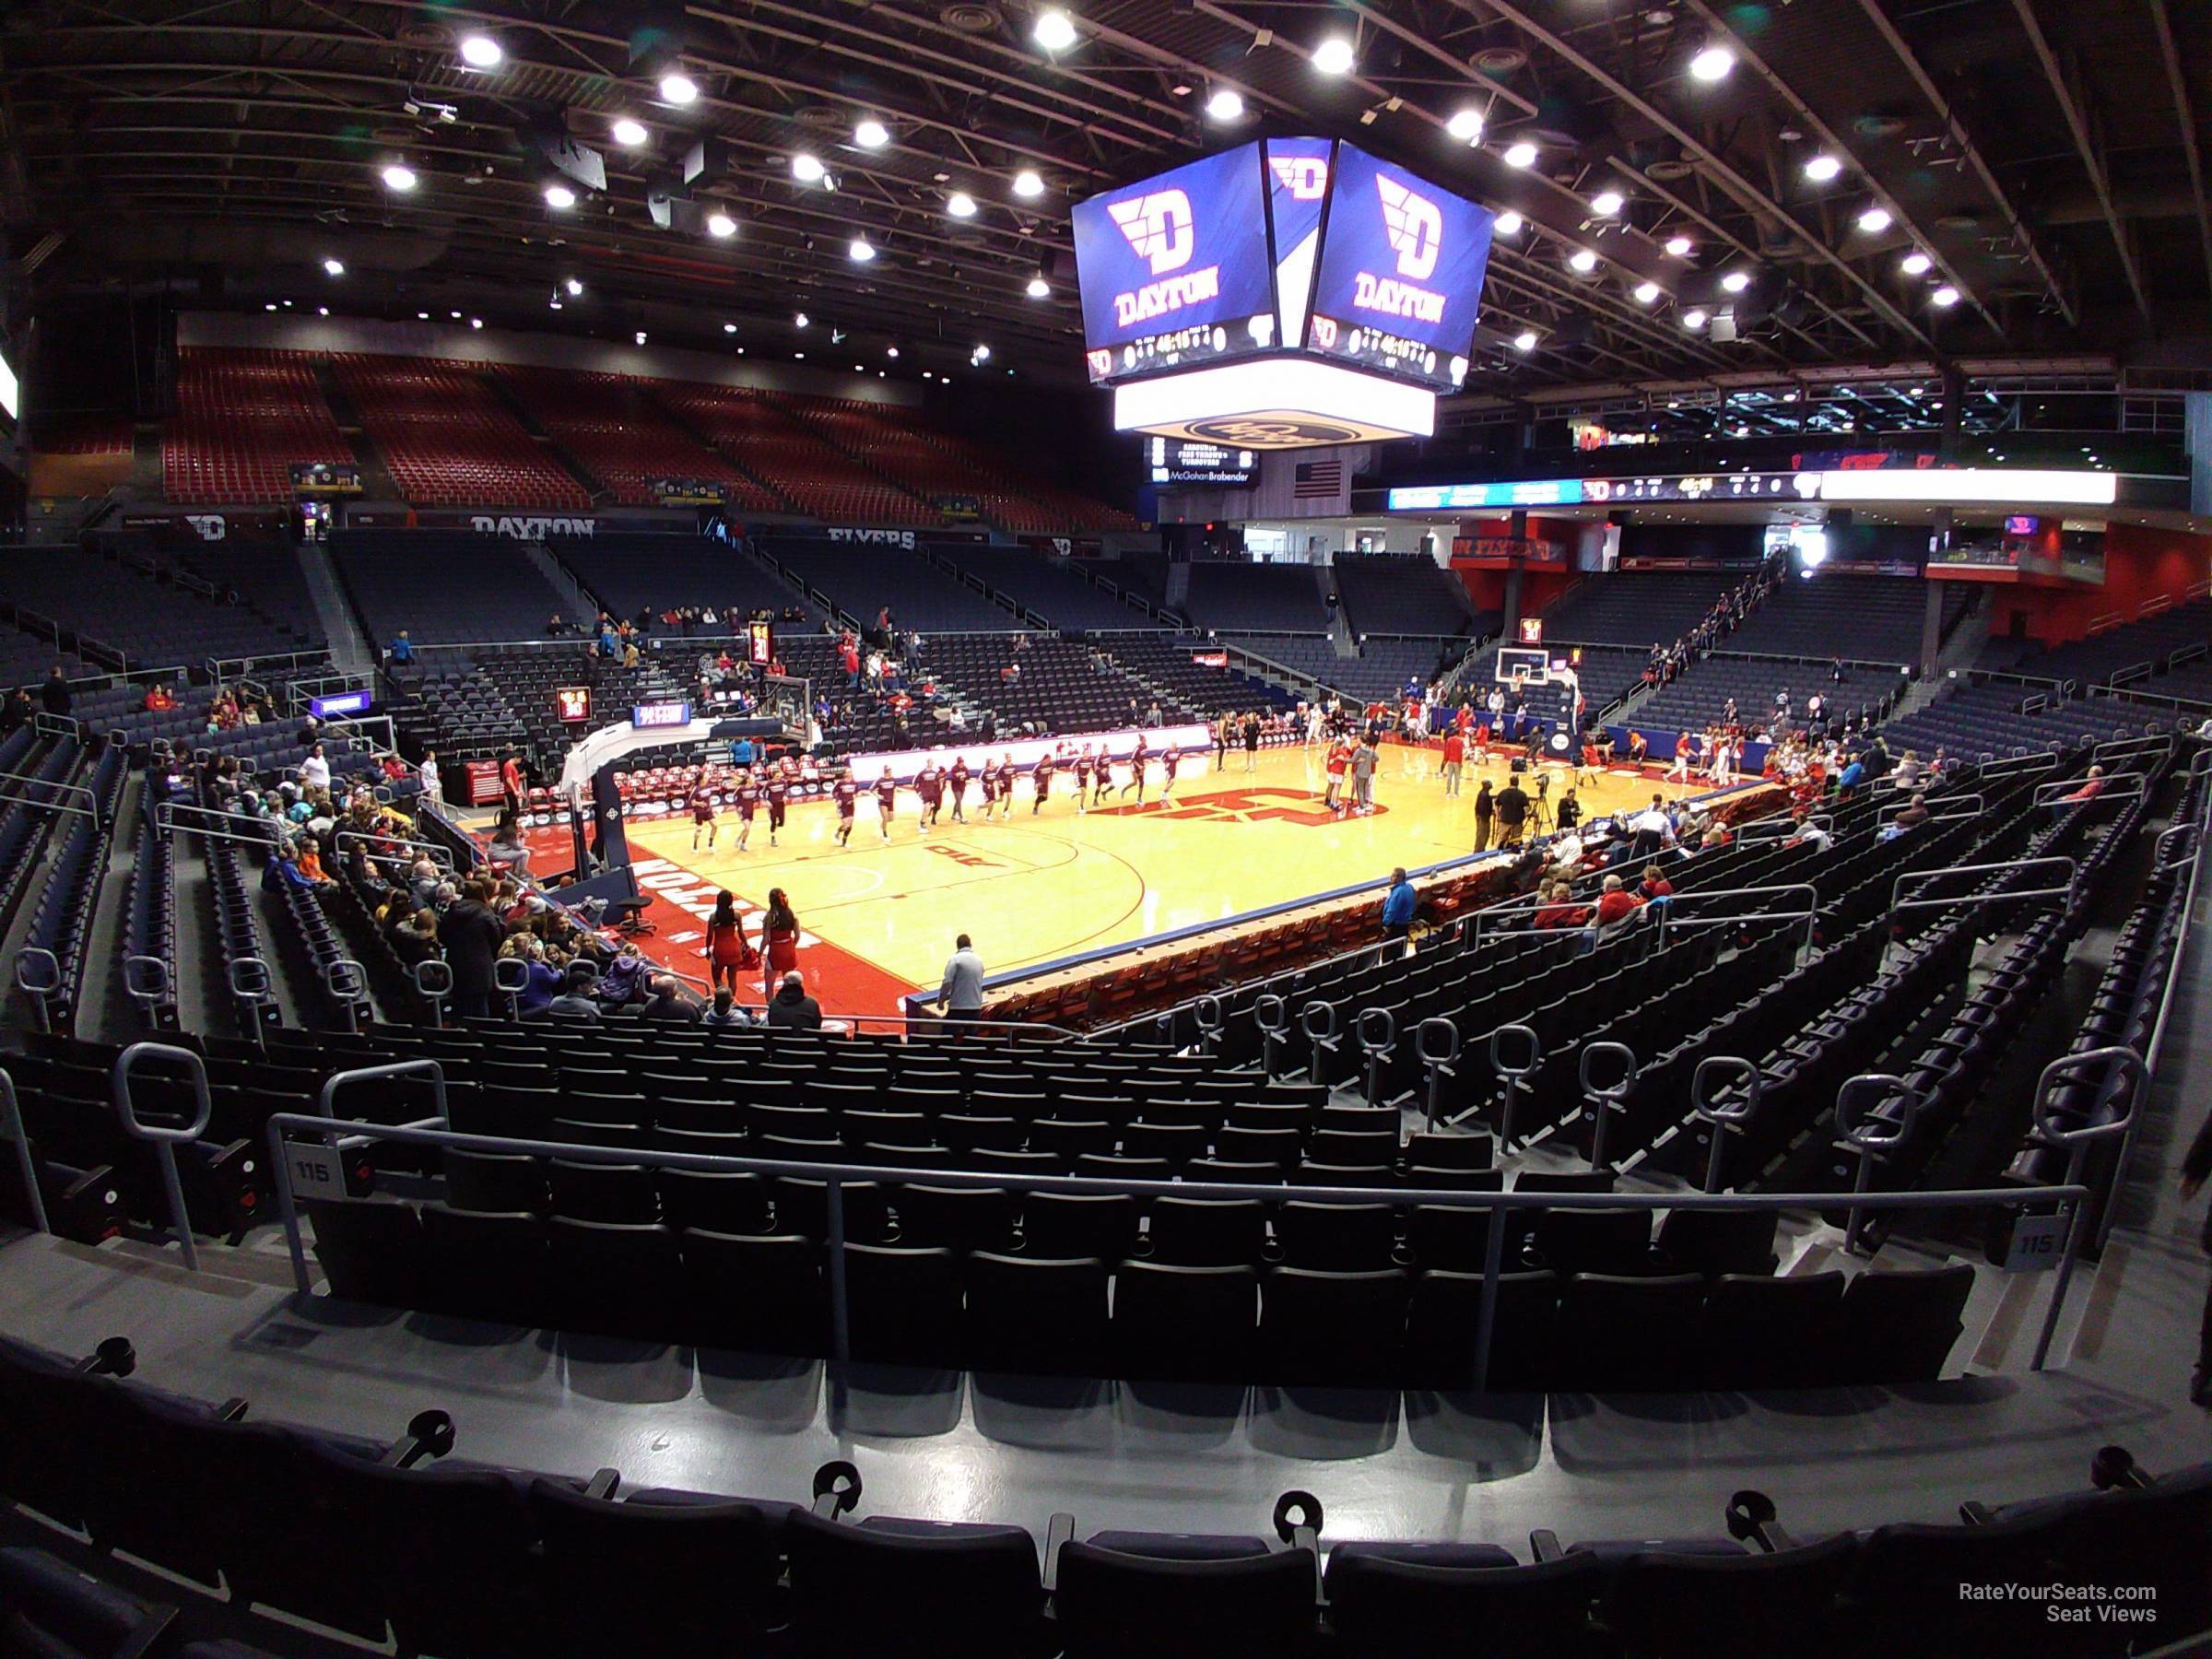 section 221, row d seat view  - university of dayton arena